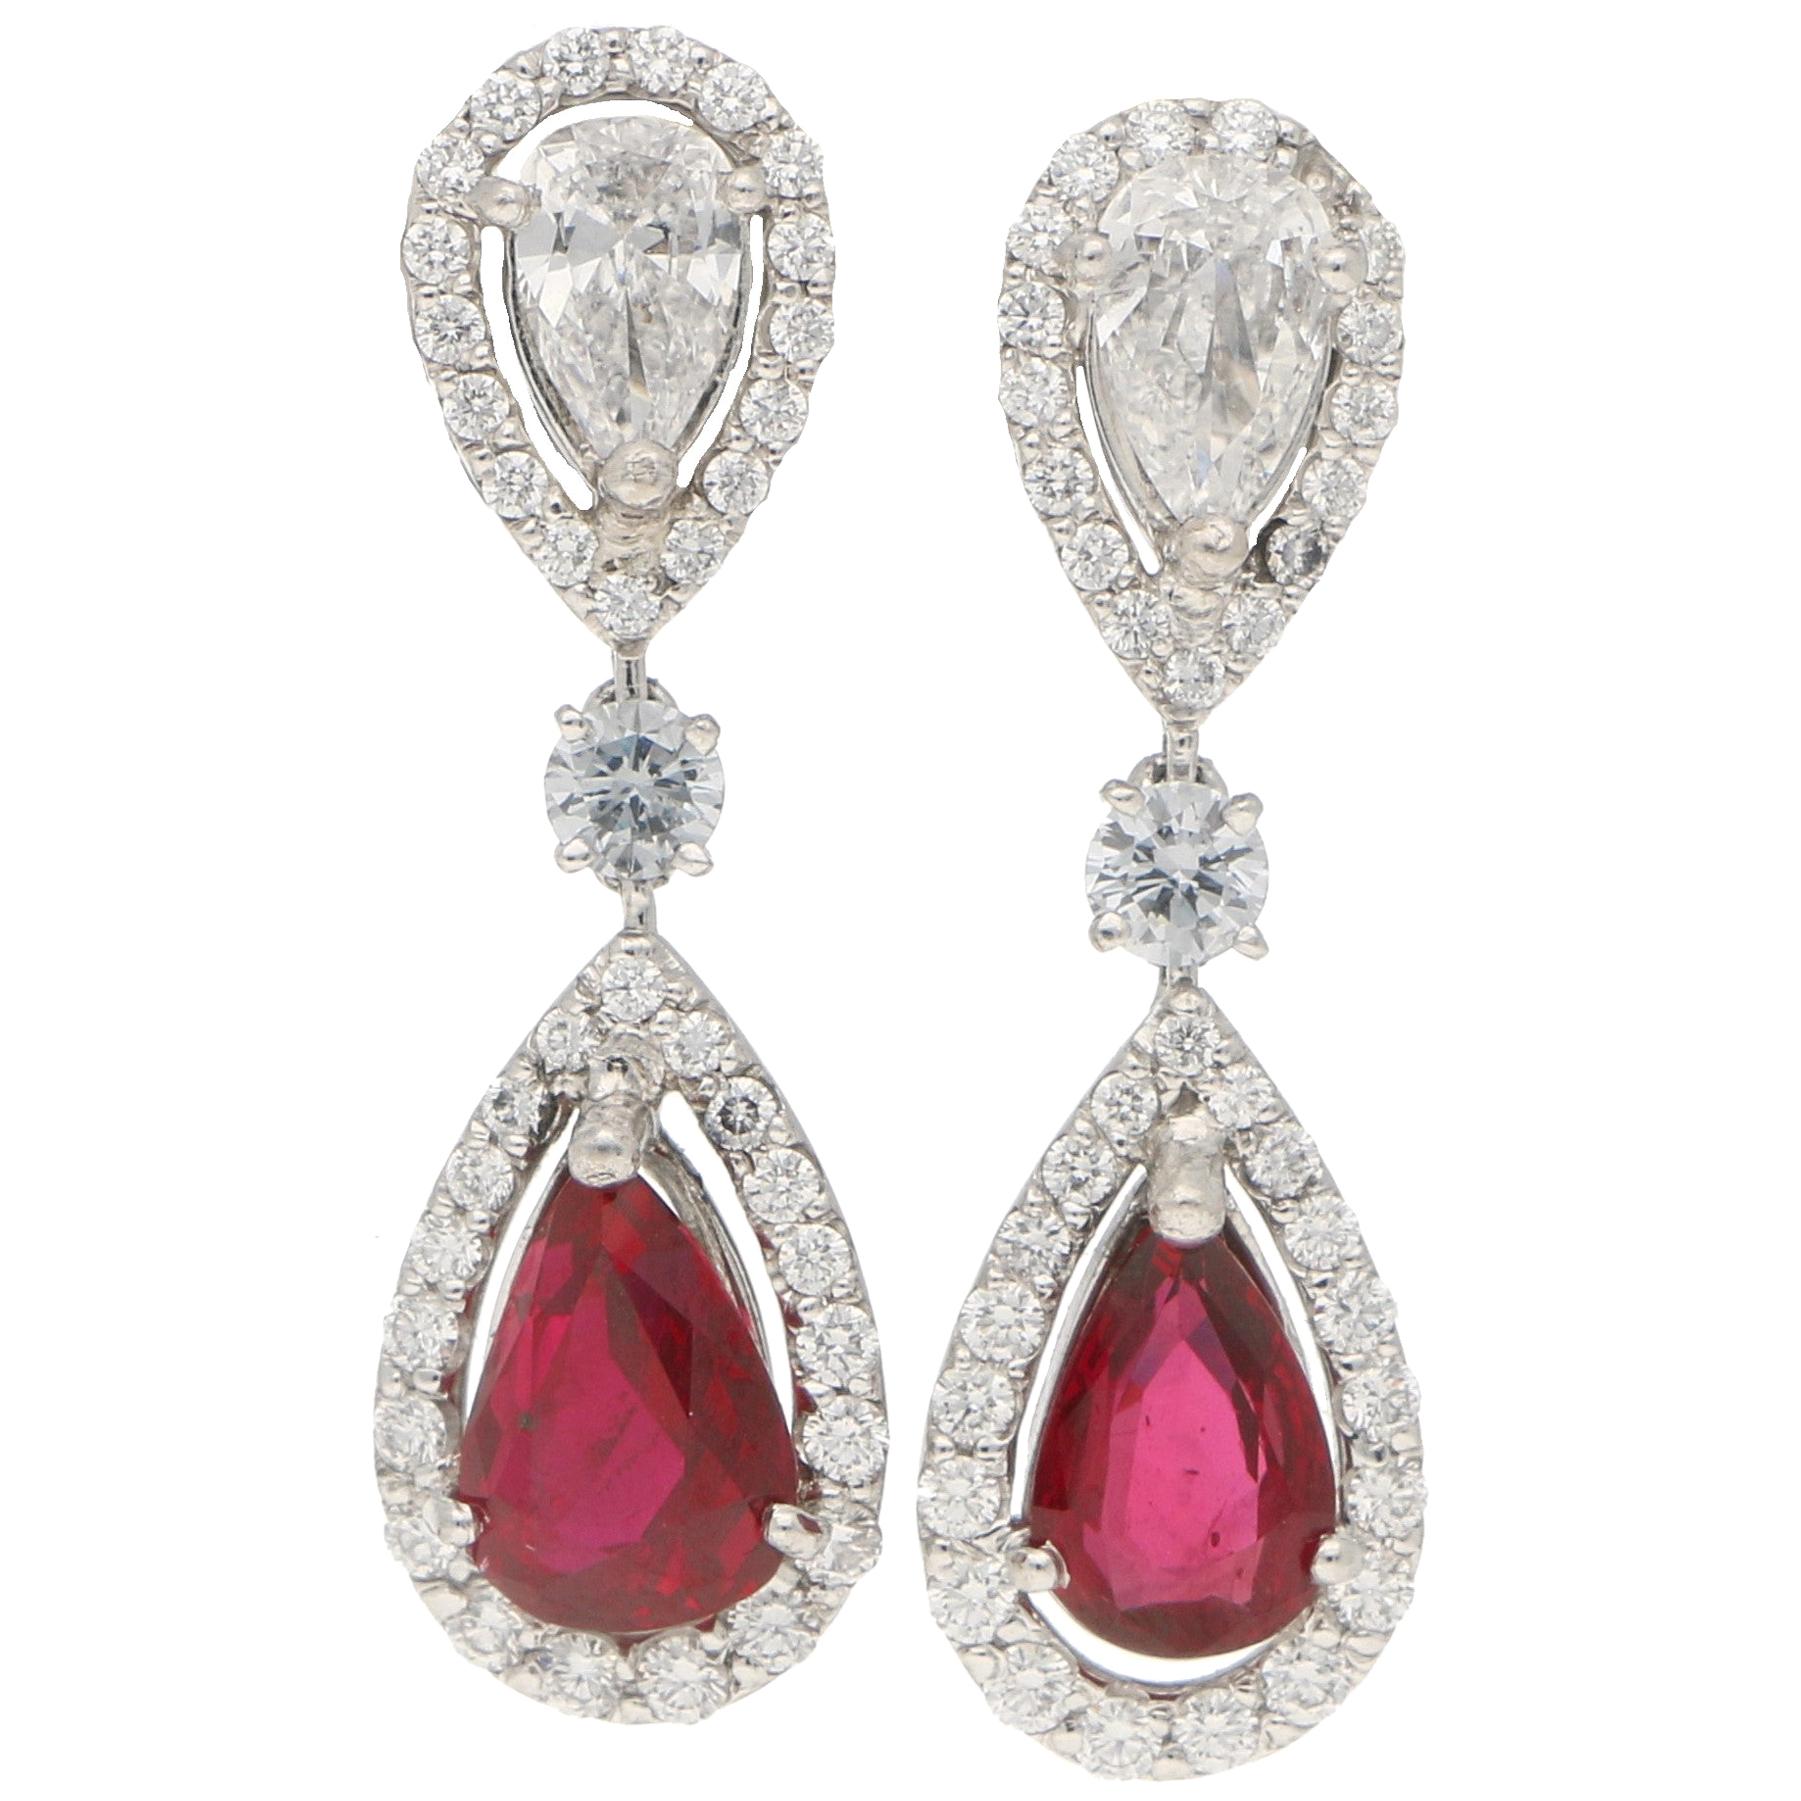 Moussaieff Ruby and Diamond Drop Earrings in Platinum